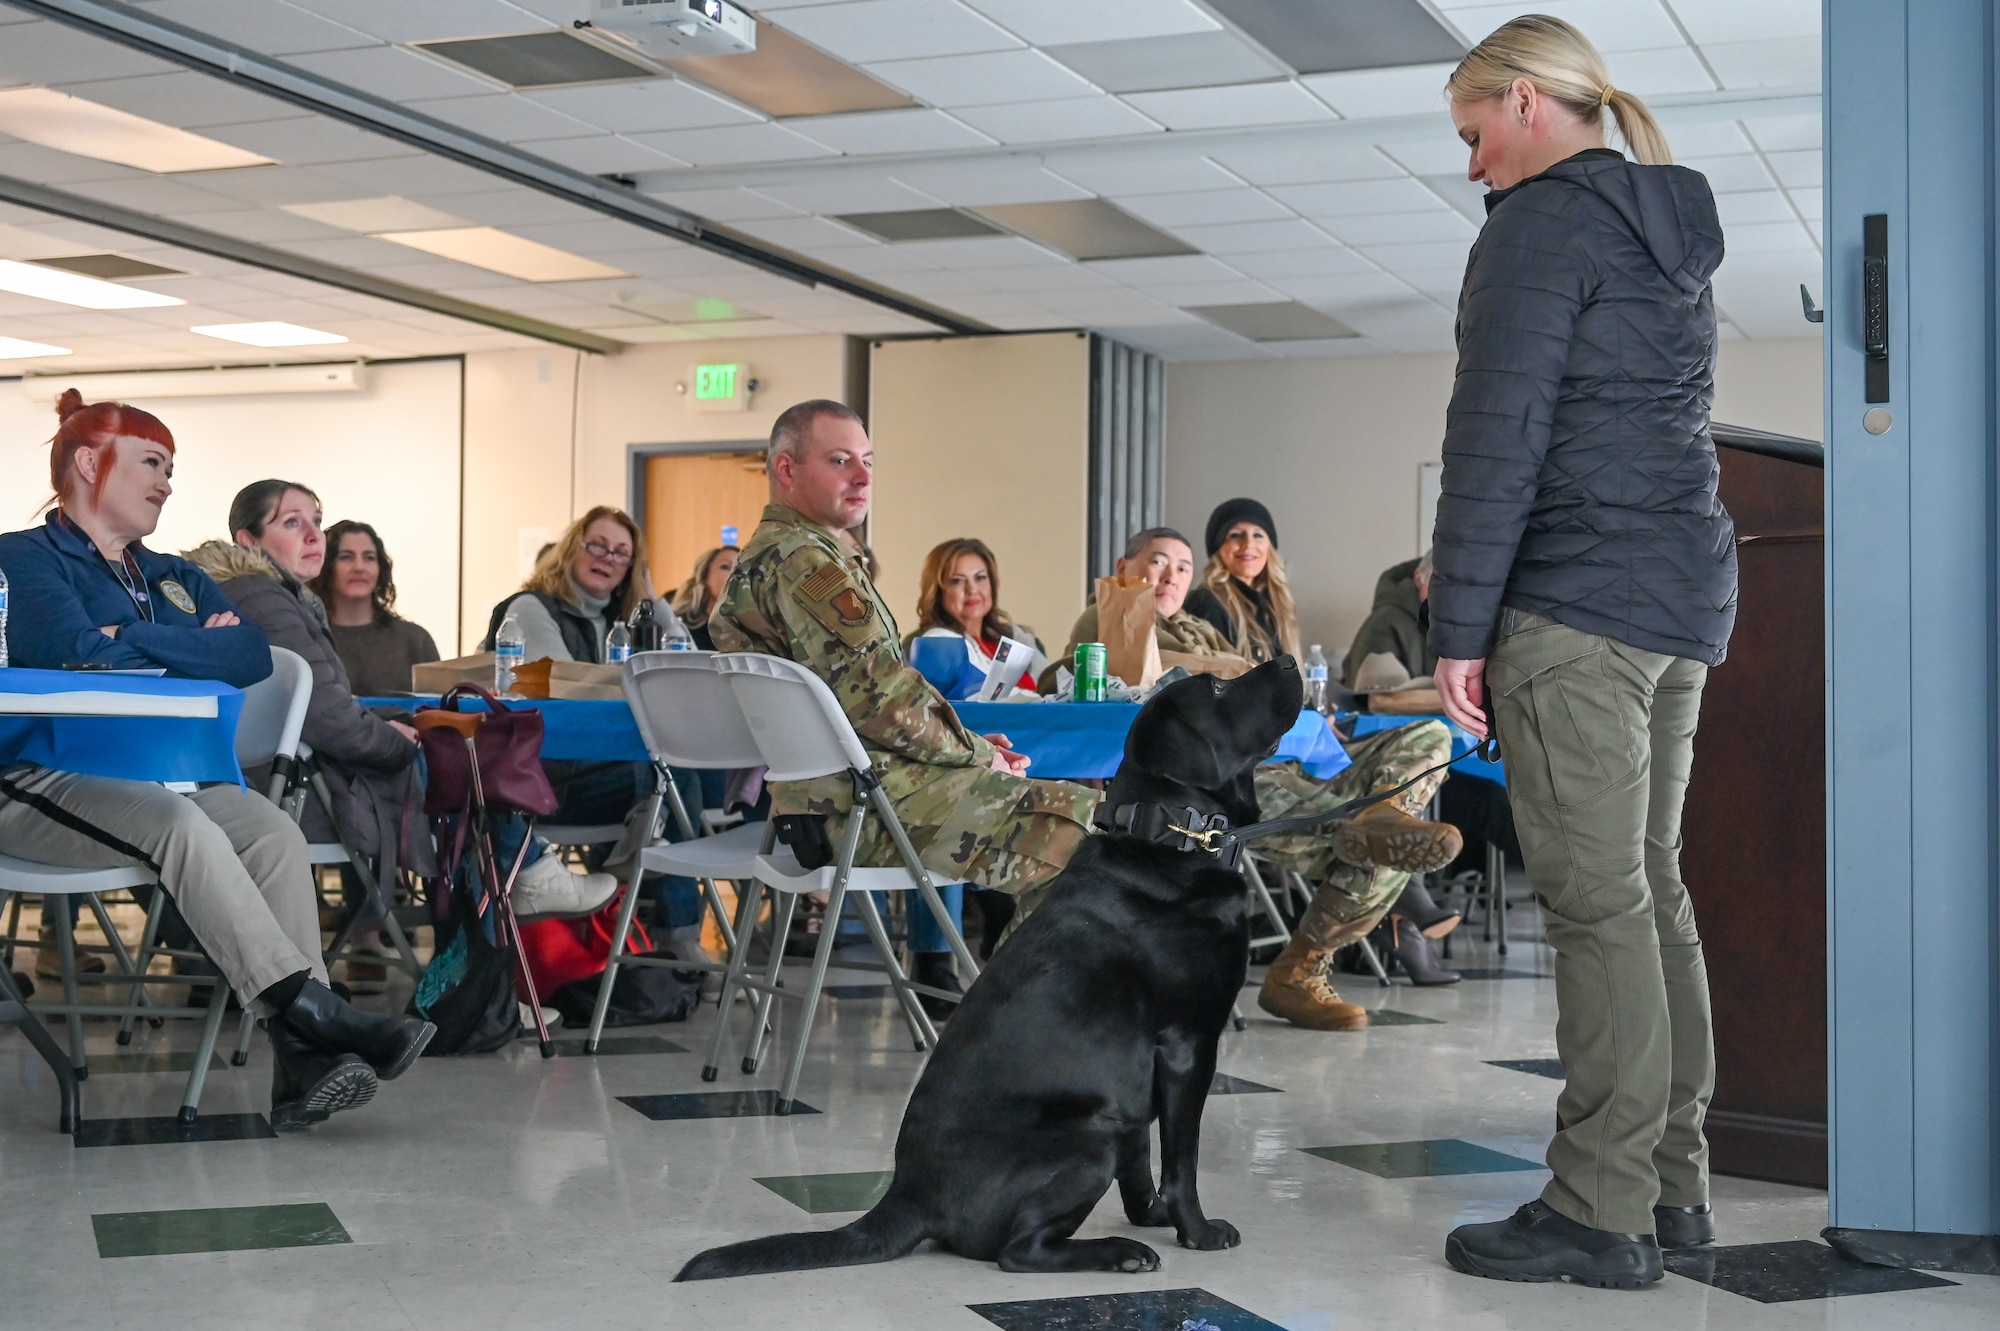 Detective Kimberly Burton, Woods Cross Police Department, and her partner, K-9 Flash, demonstrate their abilities at the Sexual Assault Prevention & Response Combating Trafficking in Persons event Jan. 24, 2023, at Hill Air Force Base, Utah.